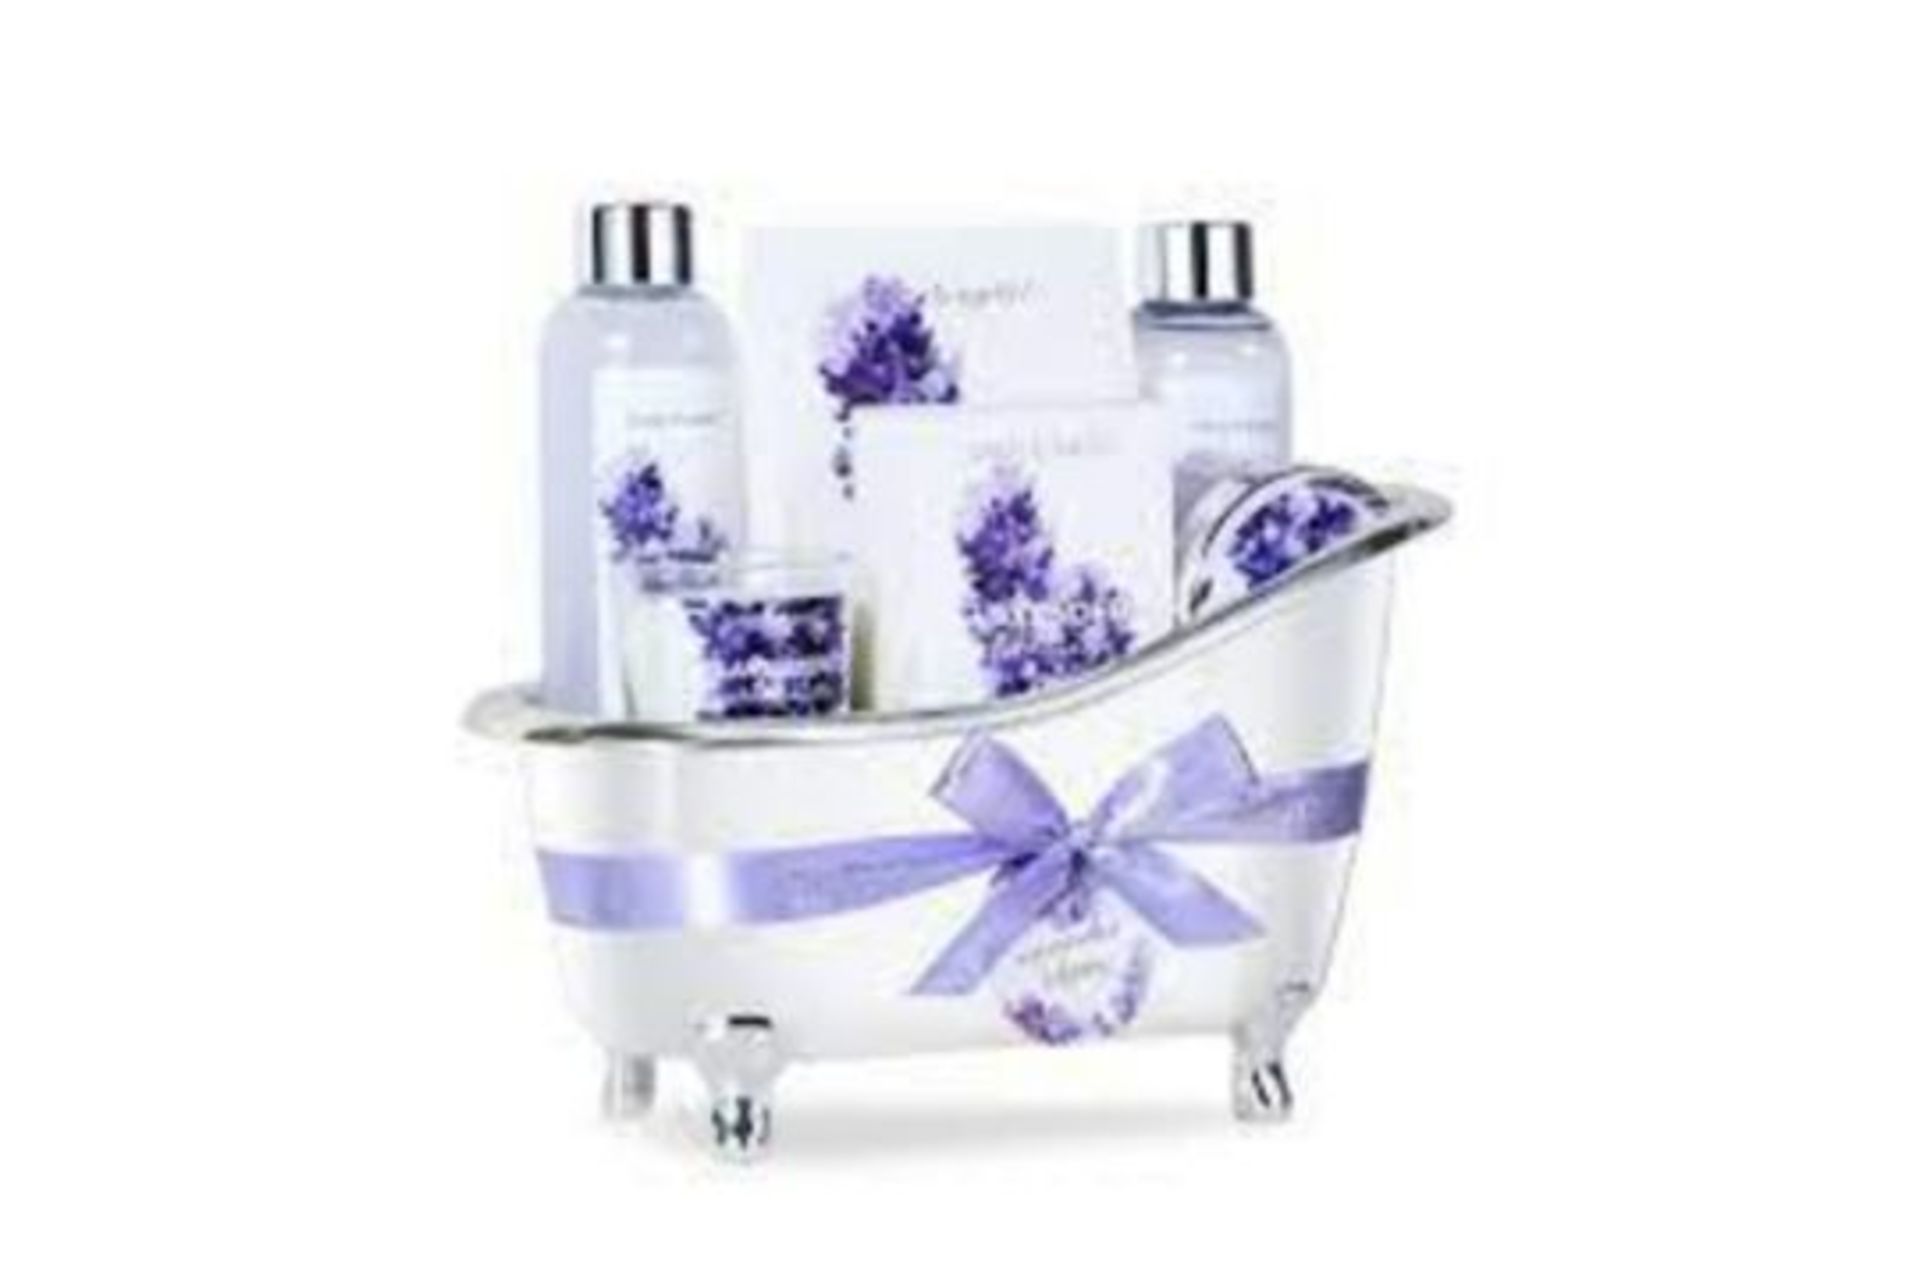 PALLET TO CONTAIN 96 x NEW PACKAGED Lavender Home Spa Bathtub Set. (SKU:SPA-18-02-NEW-1). Home Spa